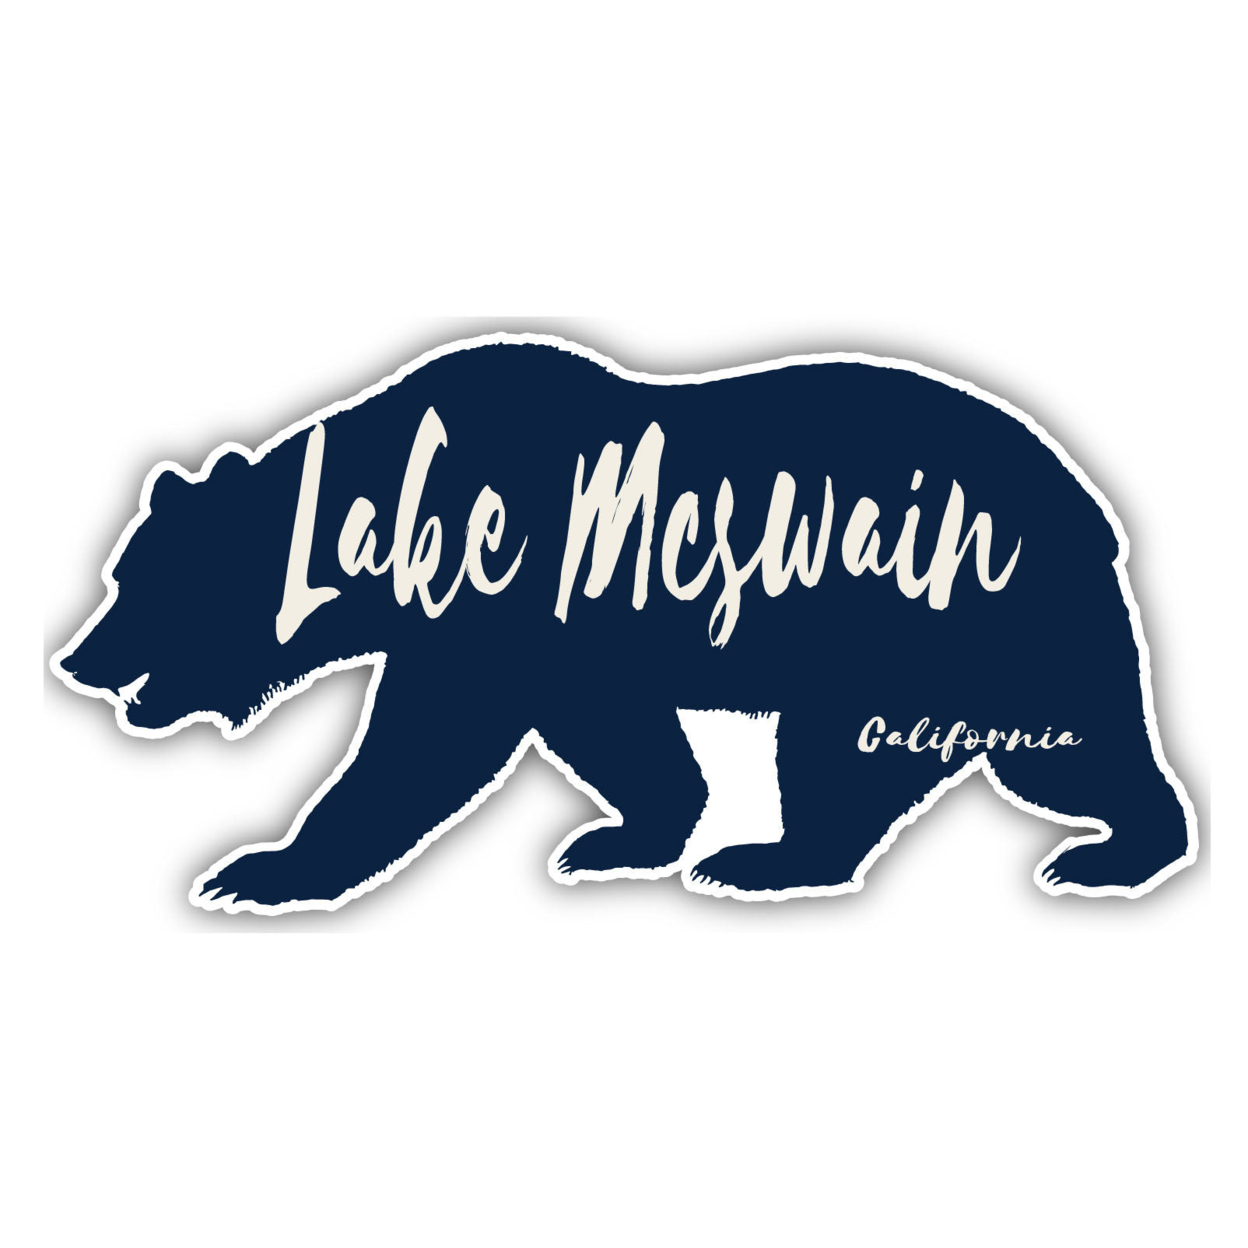 Lake Skinner California Souvenir Decorative Stickers (Choose Theme And Size) - 2-Inch, Camp Life